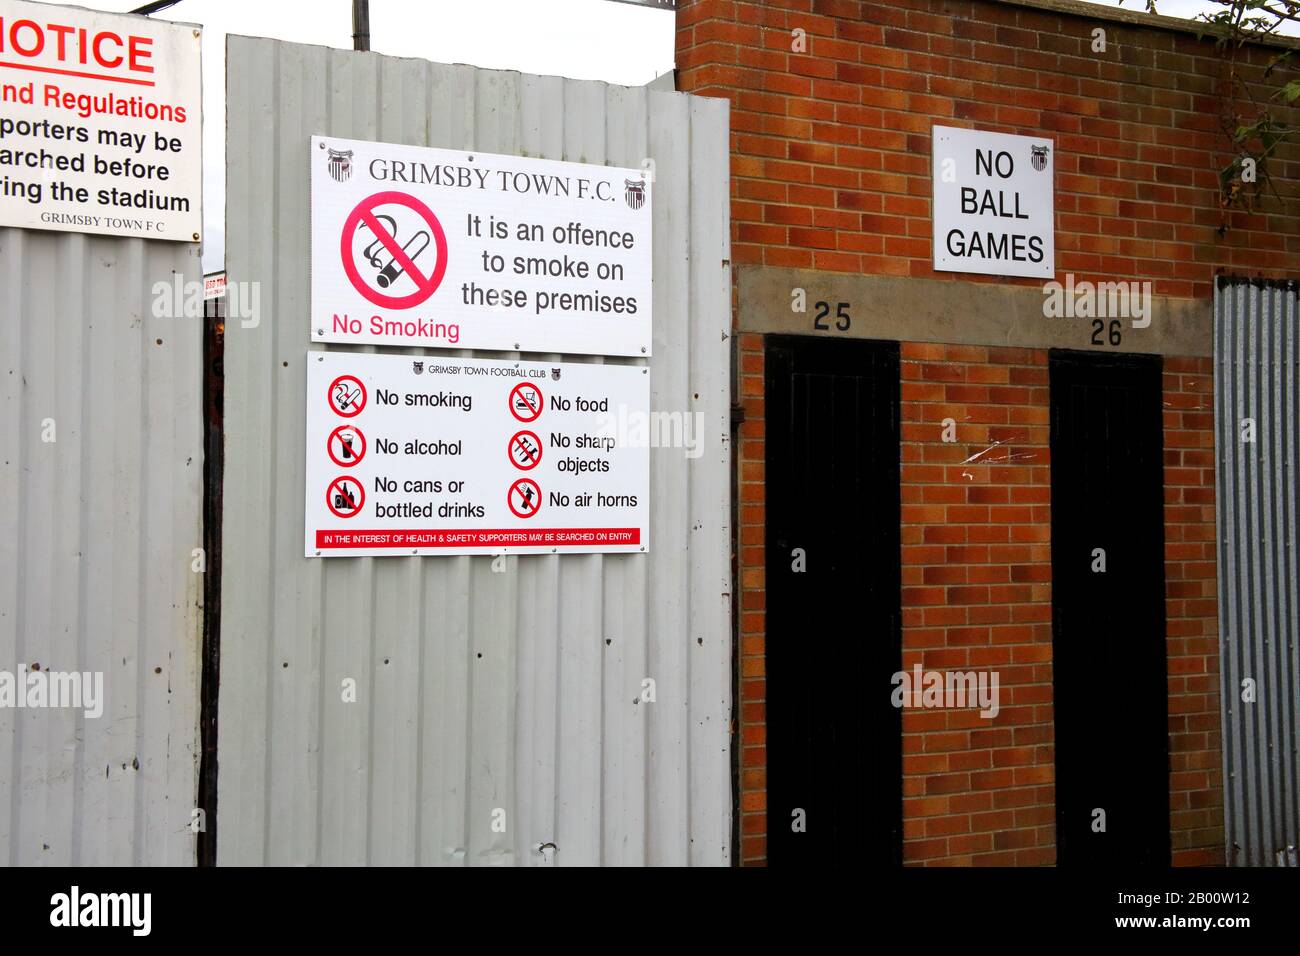 no ball games at grimsby town football club lincolnshire Stock Photo